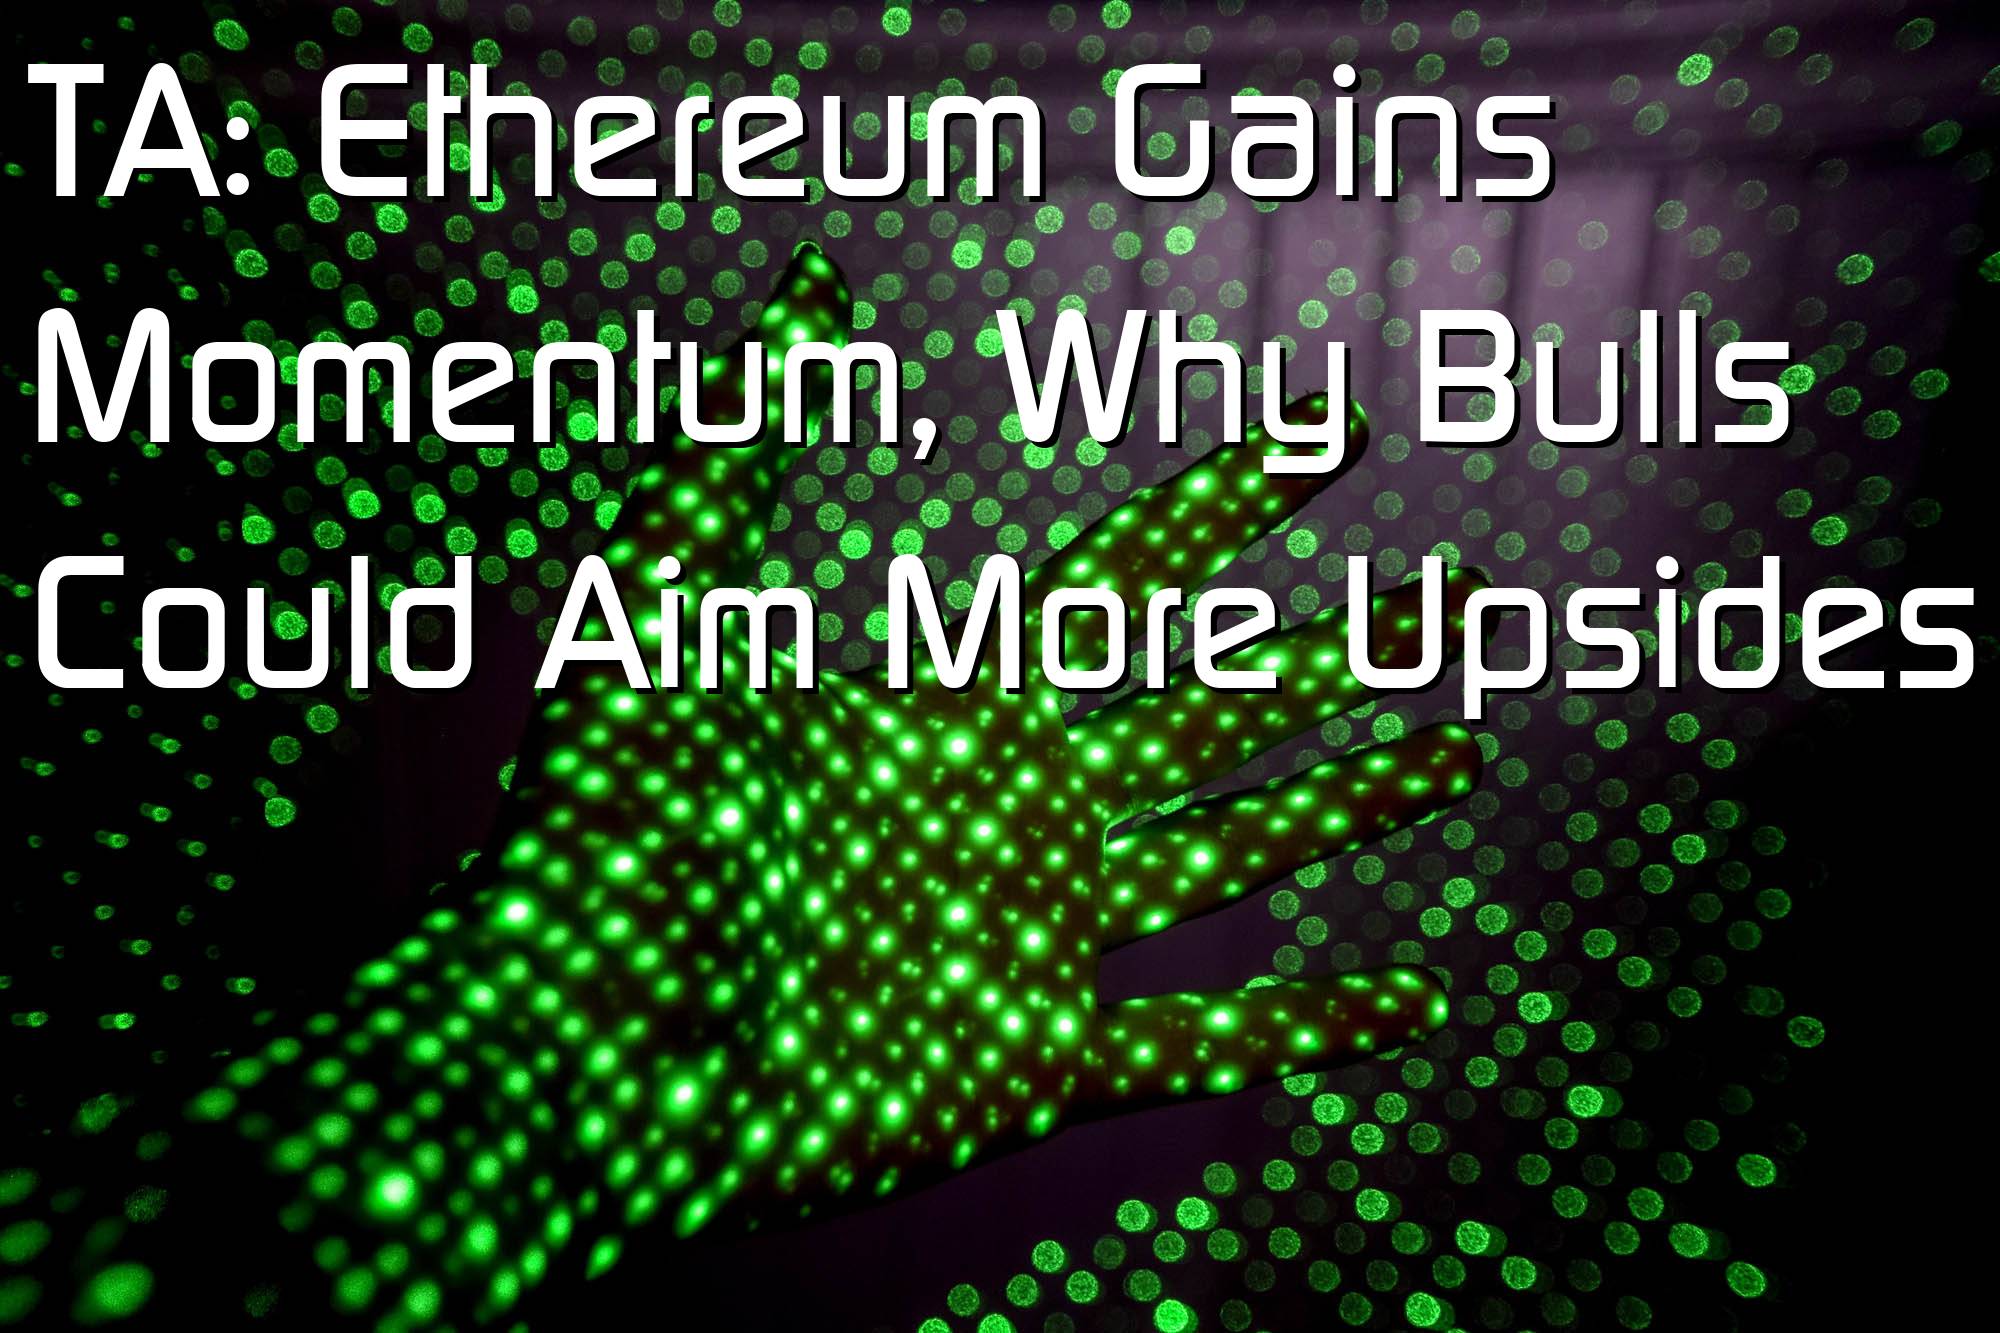 @$62318: TA: Ethereum Gains Momentum, Why Bulls Could Aim More Upsides